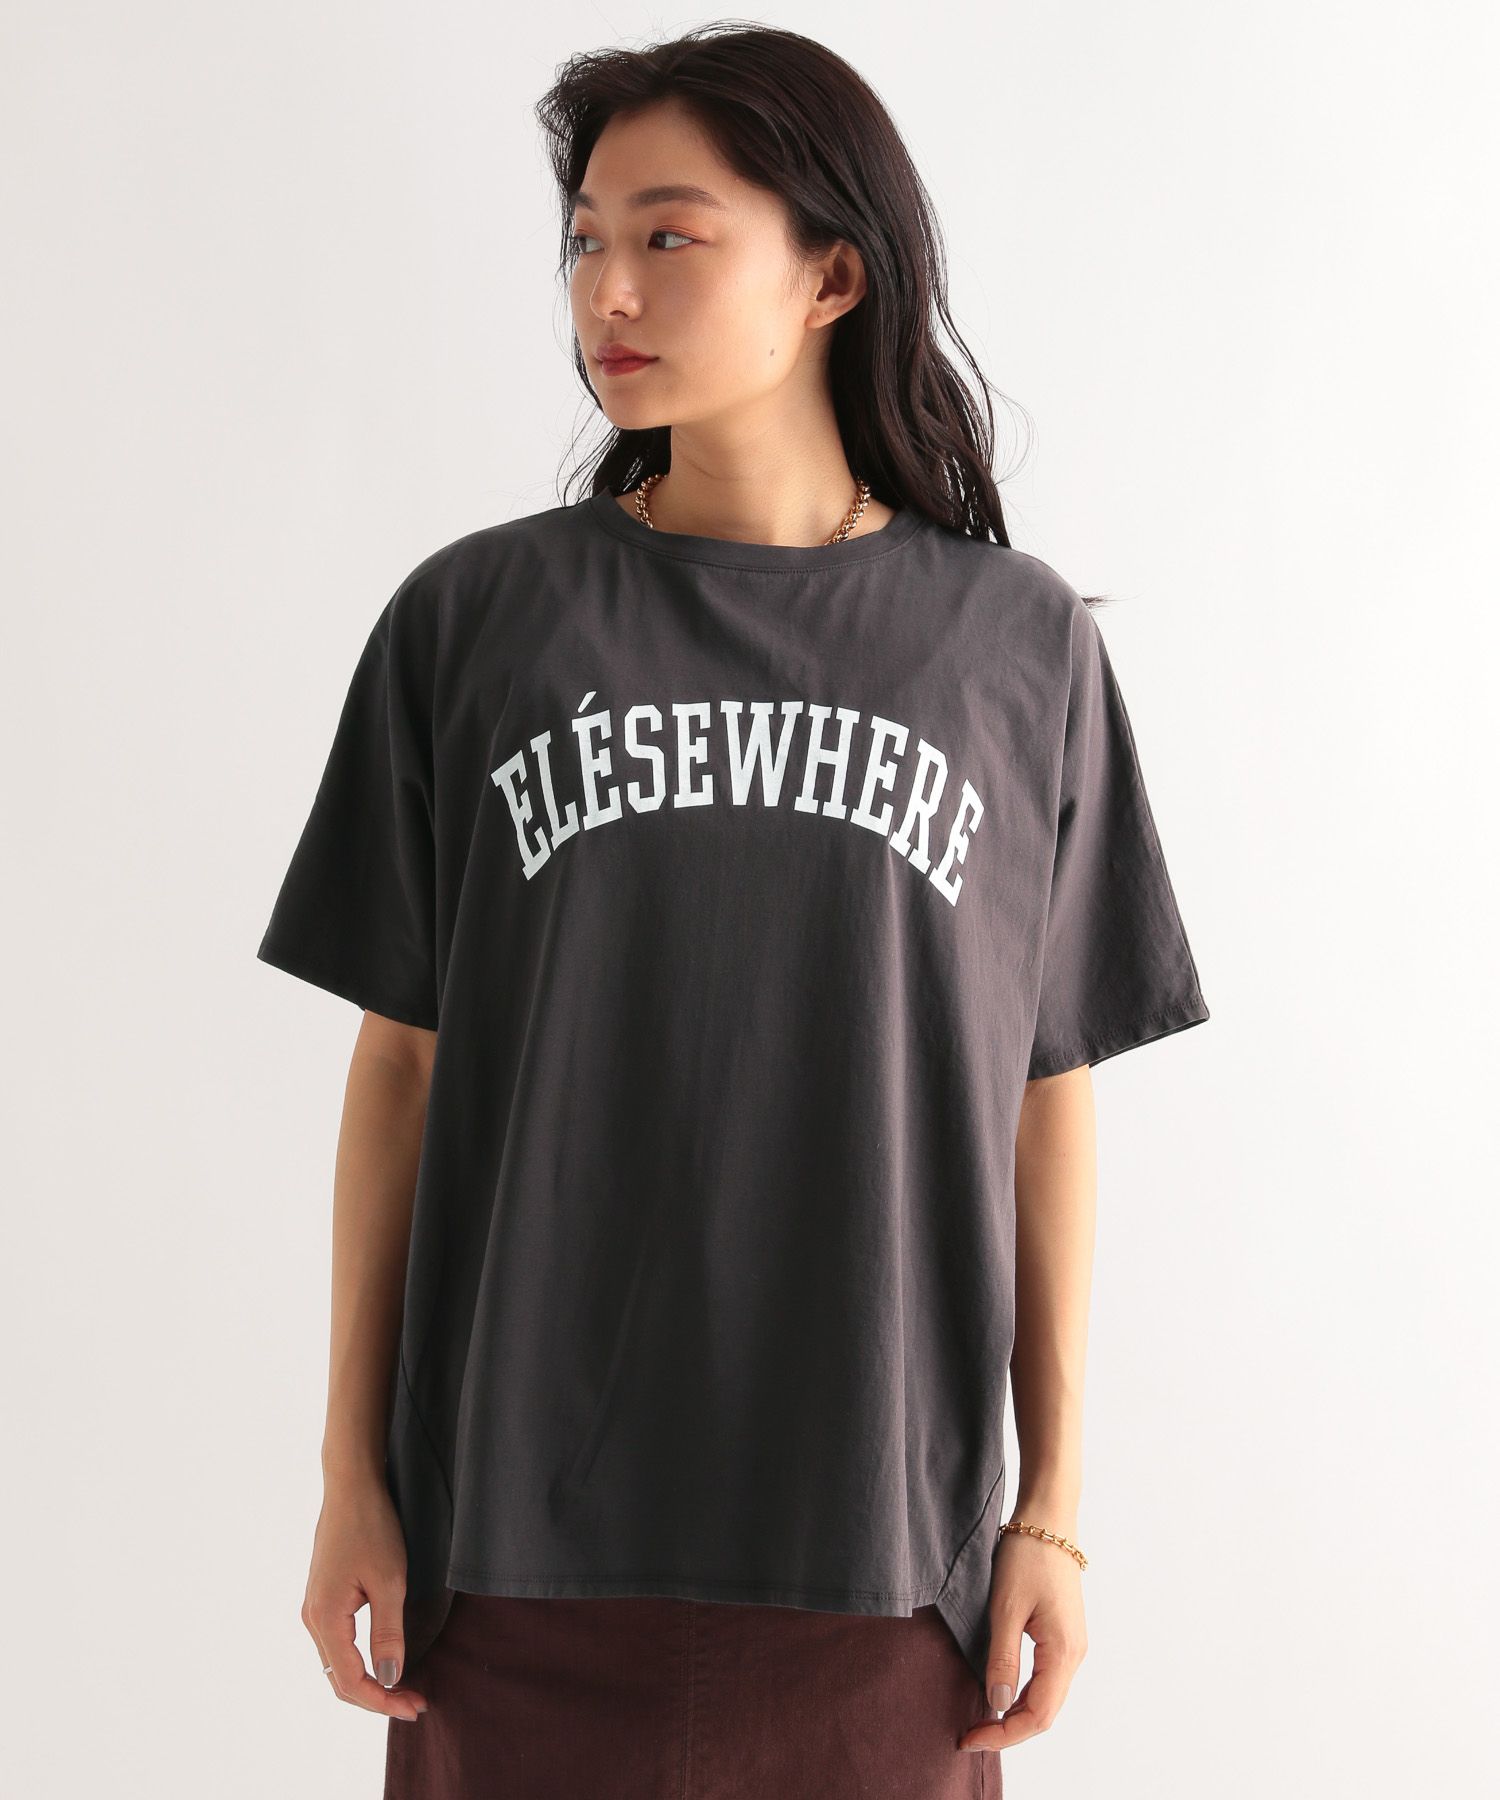 【MICA&DEAL】ELSEWHERE Tシャツ FREE